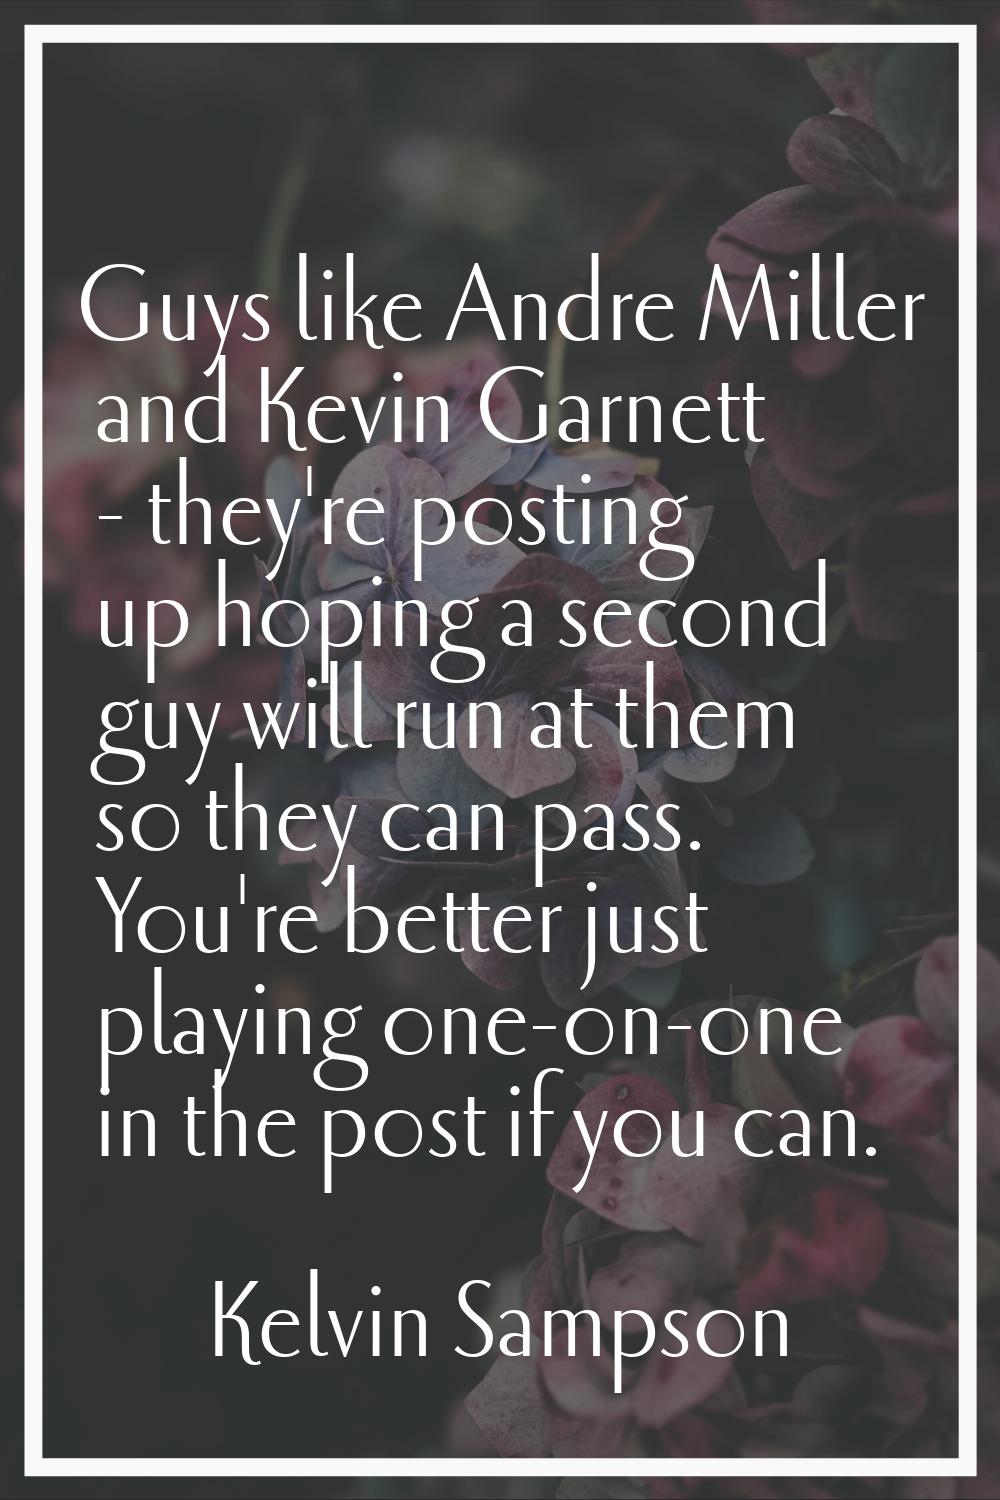 Guys like Andre Miller and Kevin Garnett - they're posting up hoping a second guy will run at them 